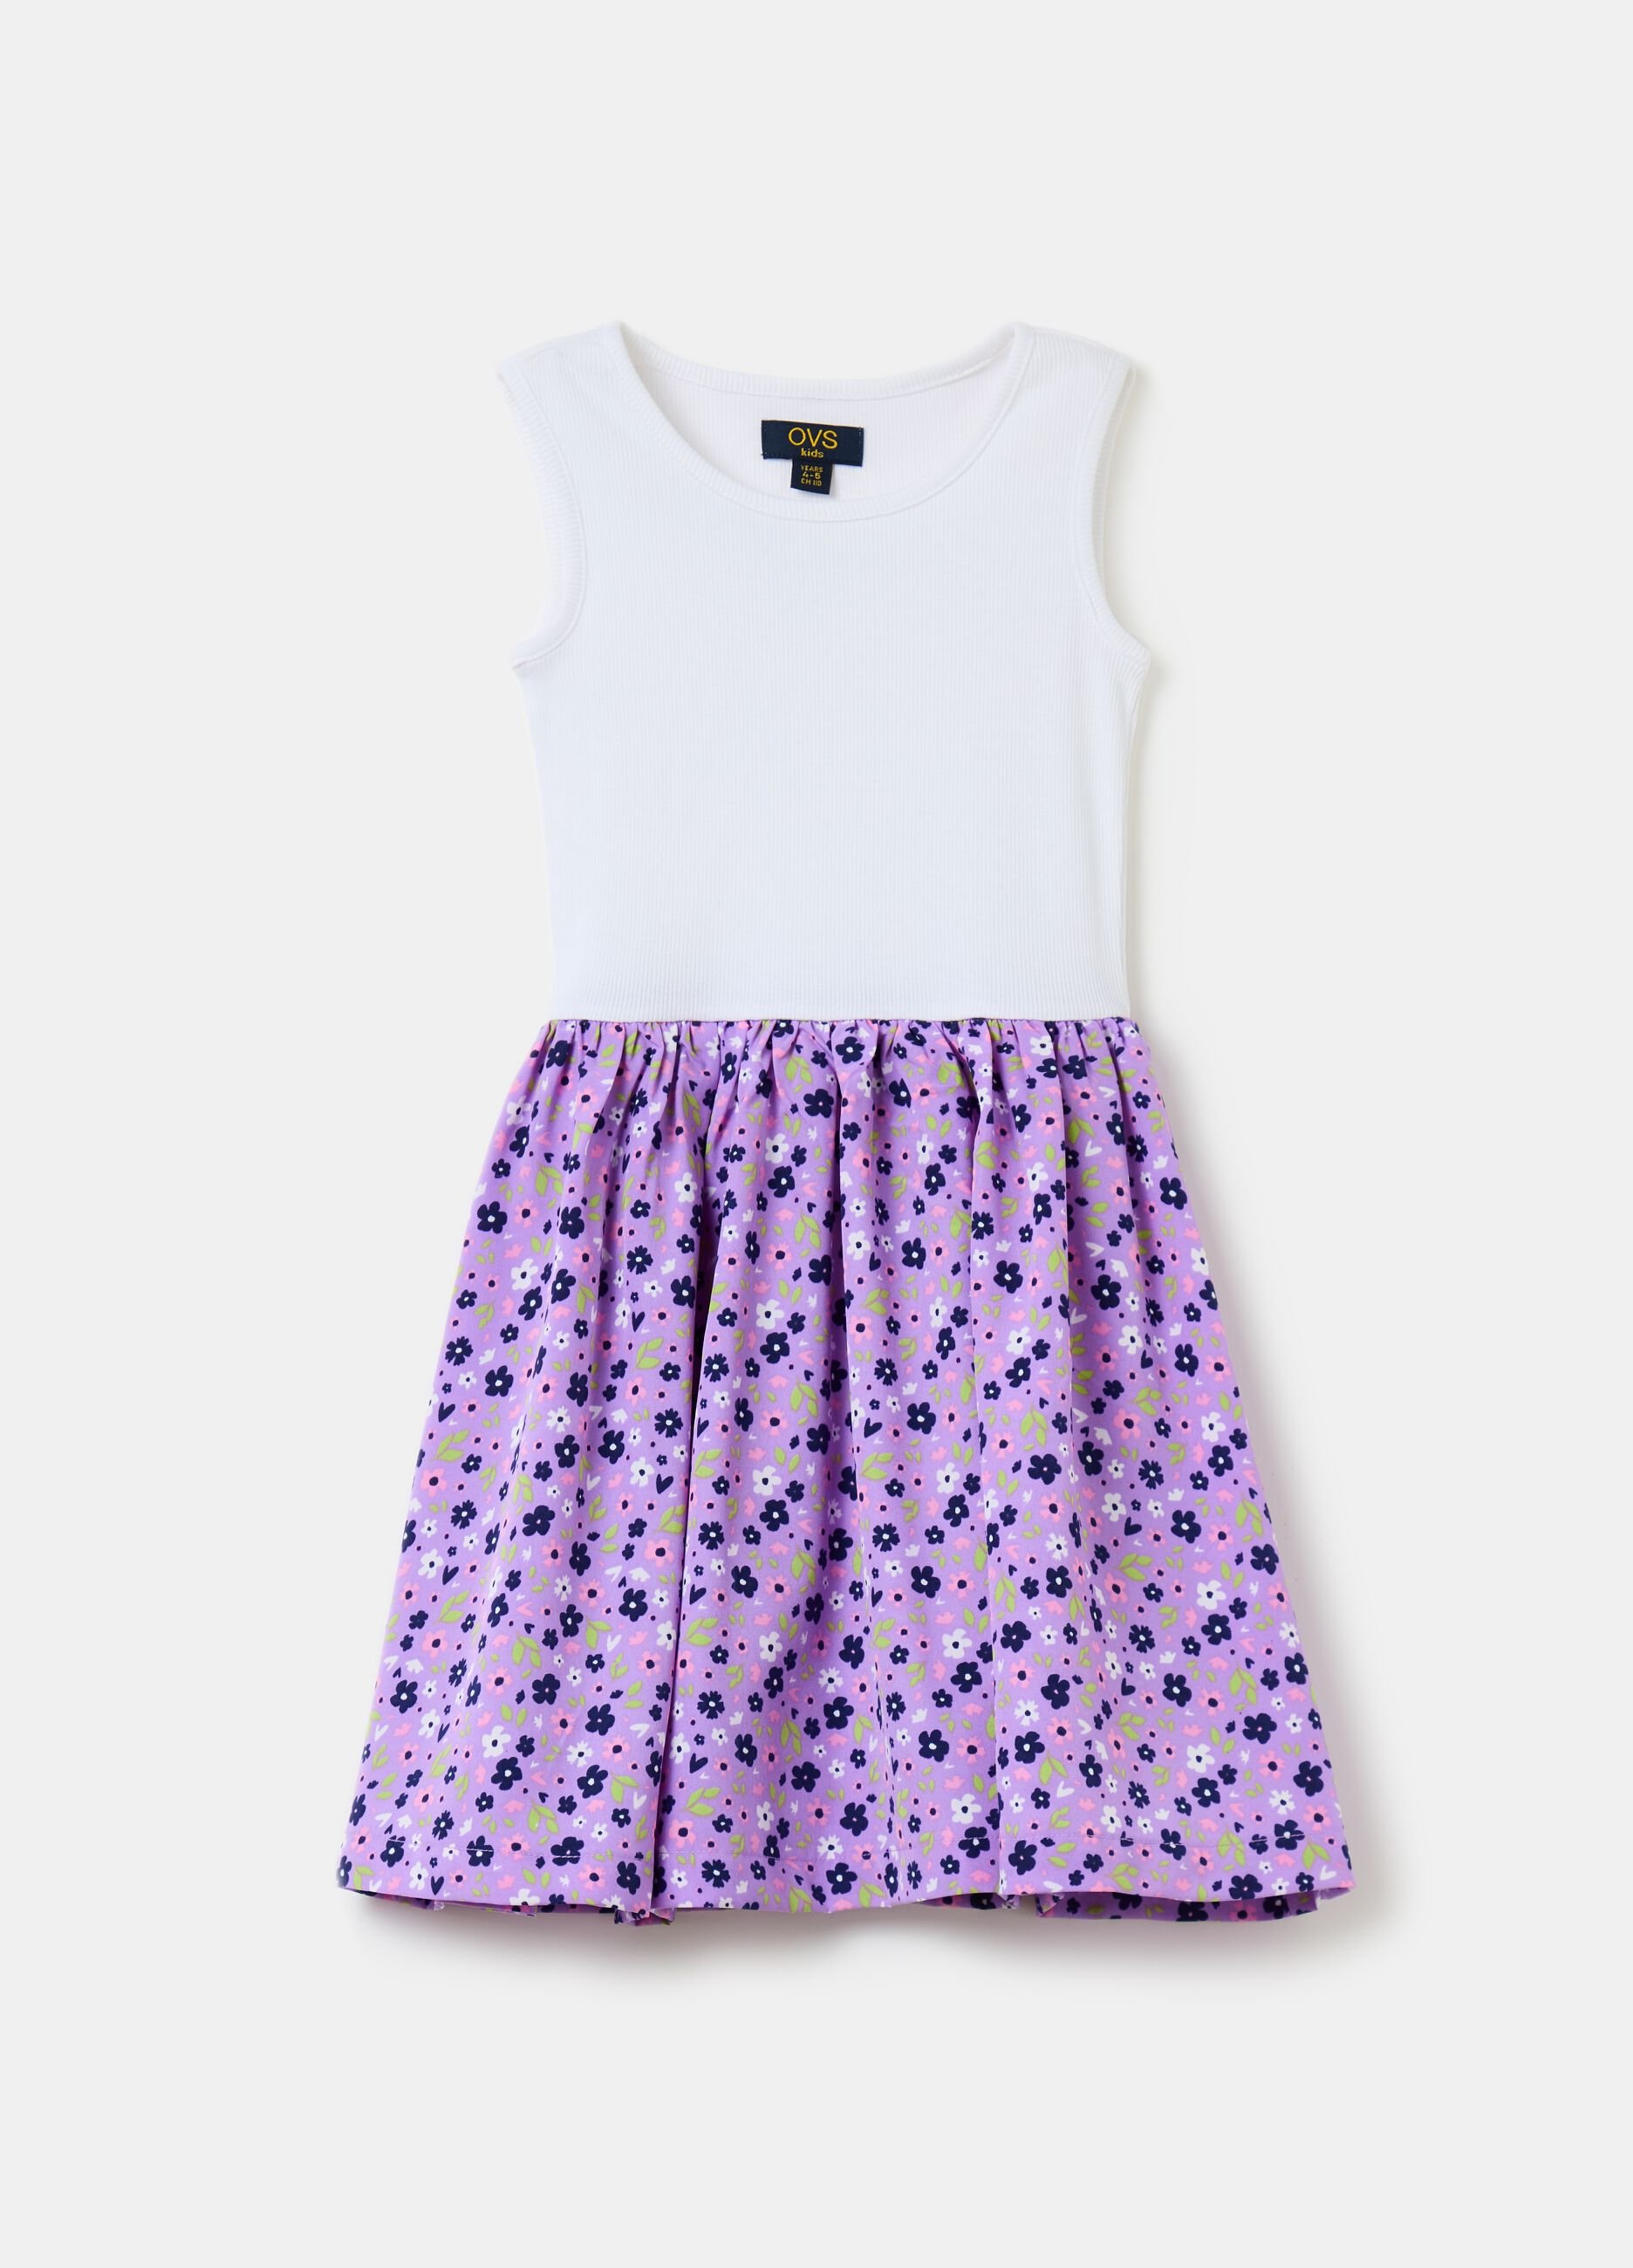 Dress with ribbed top and printed skirt